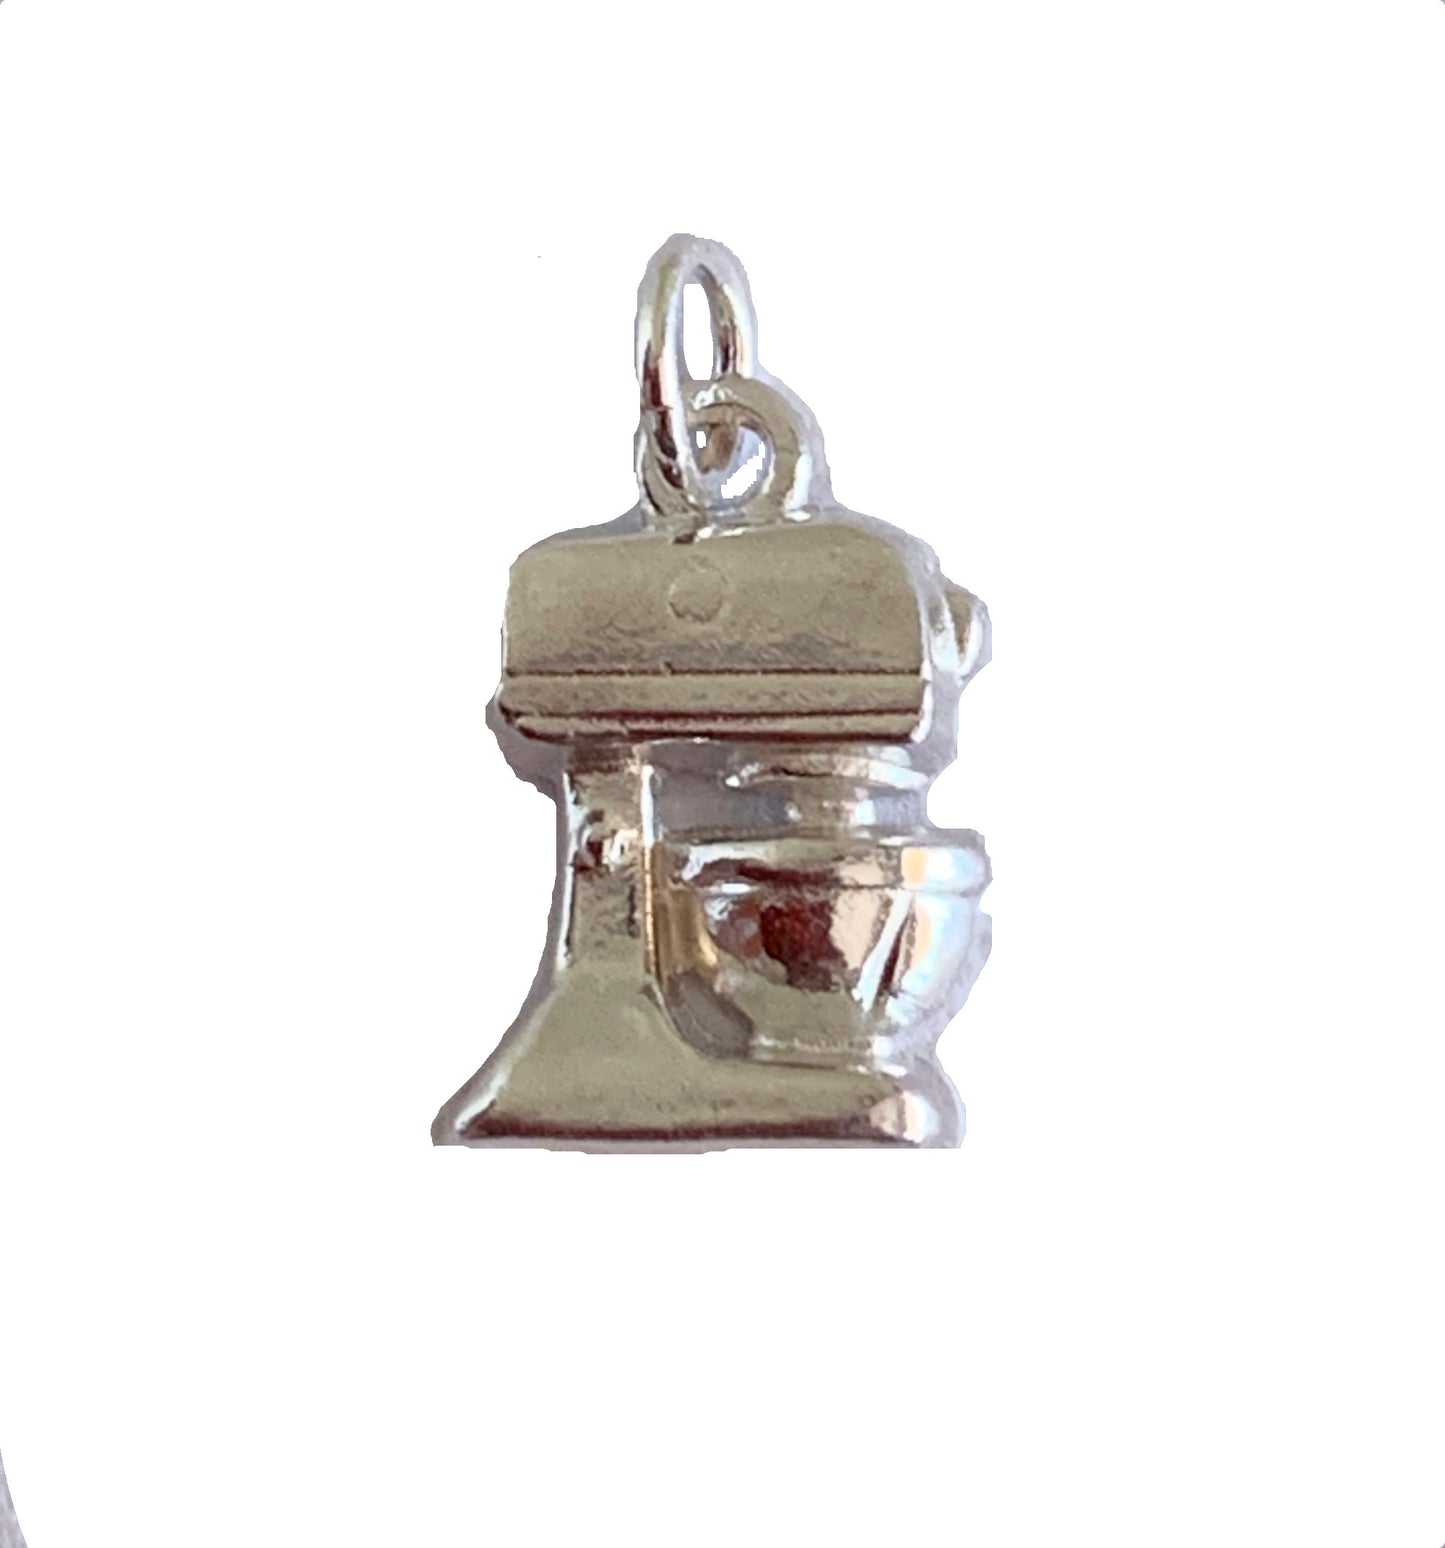 Baker's Standing Mixer Charm in Sterling Silver